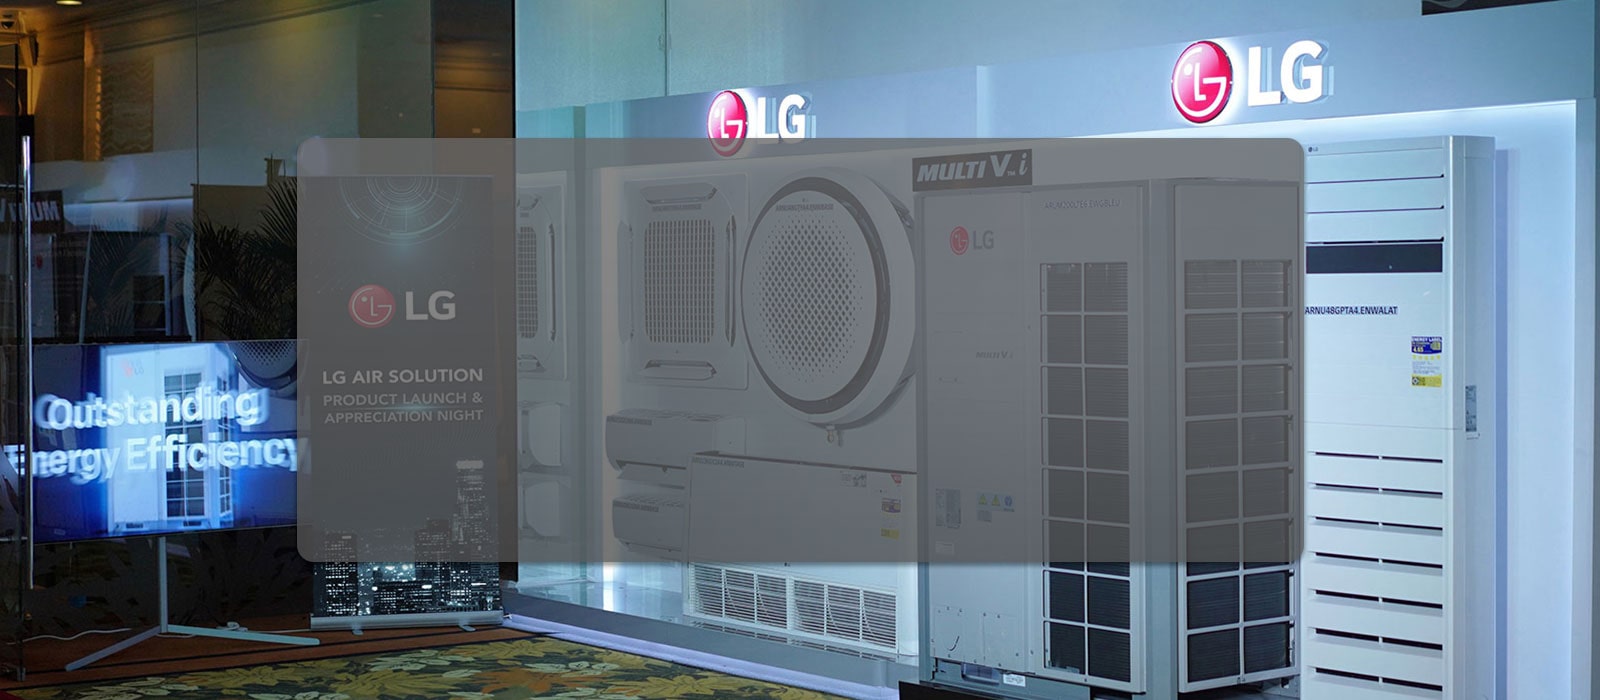 LG PH Celebrates Success With Launch of the Energy Efficient Multi V i With Cutting-Edge AI Engine